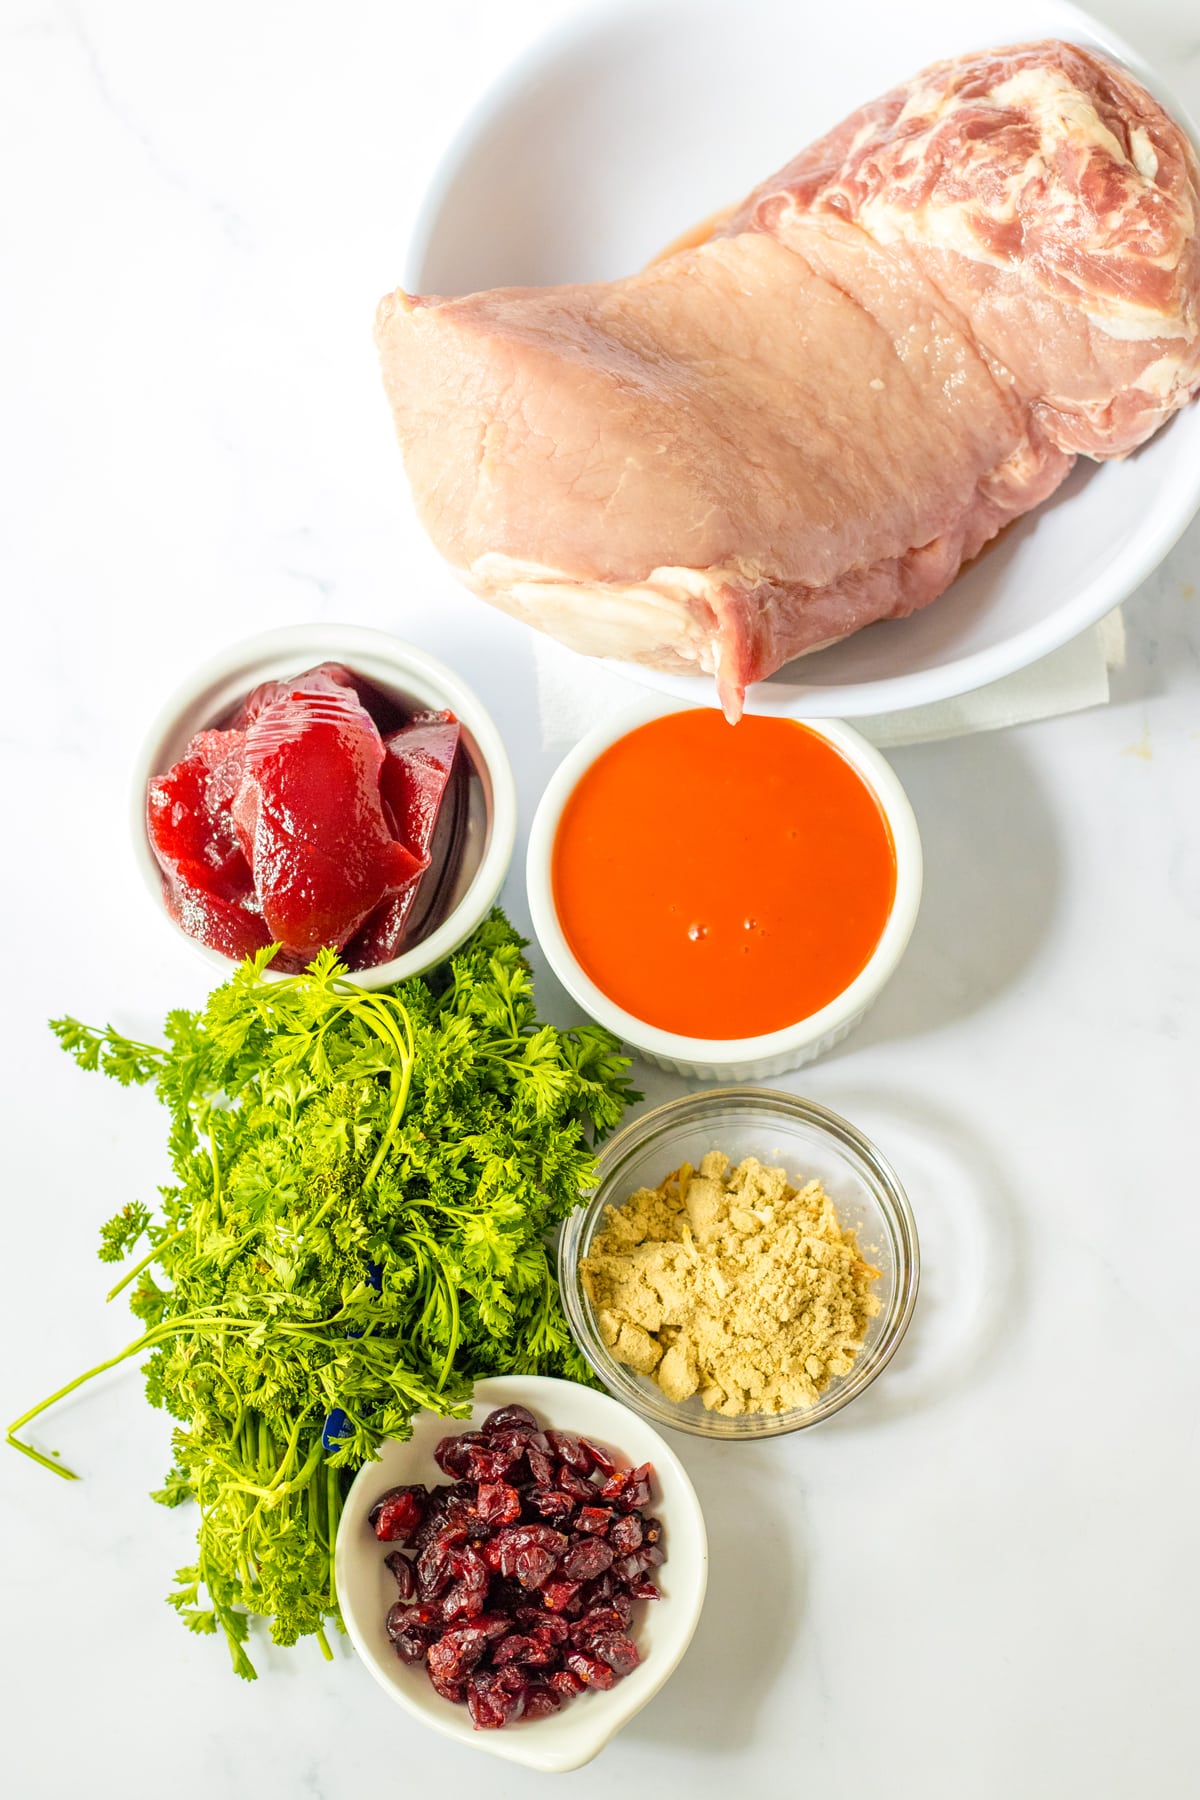 Ingredients for Slow Cooker Cranberry Pork include pork loin roast, dry onion soup mix, french dressing, canned cranberry sauce (jellied or whole cranberry sauce), and dried cranberries and parsley for garnish